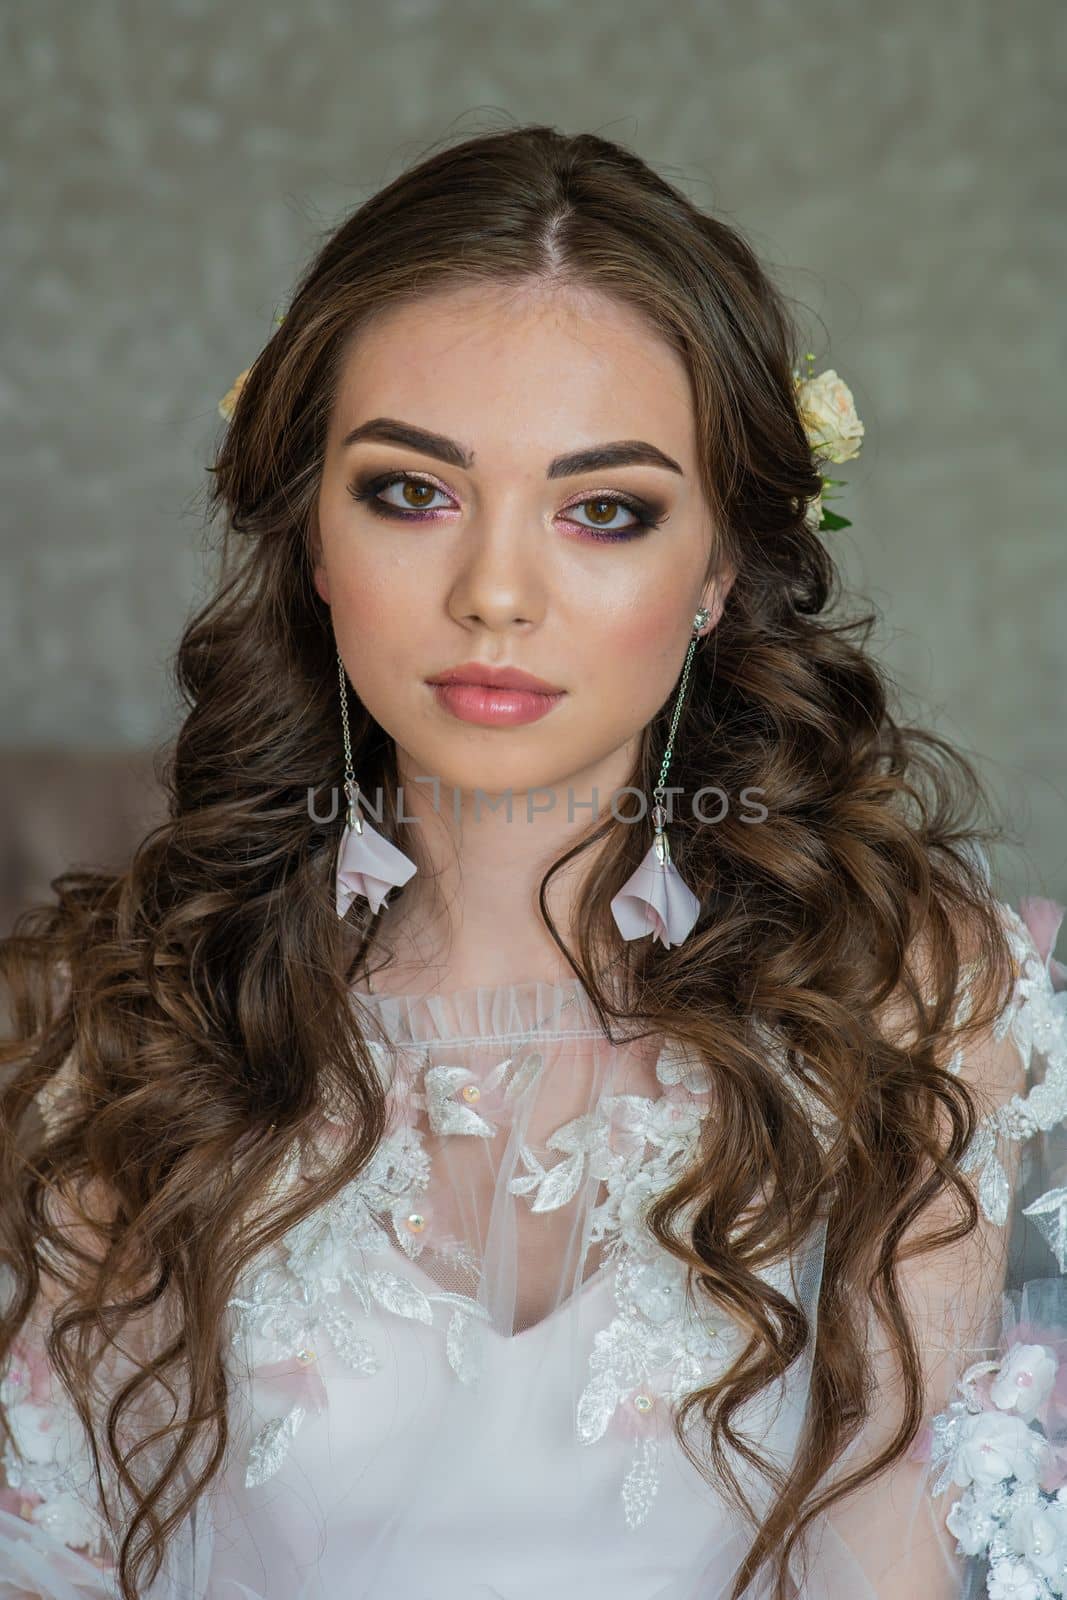 Beautiful makeup for a young bride girl